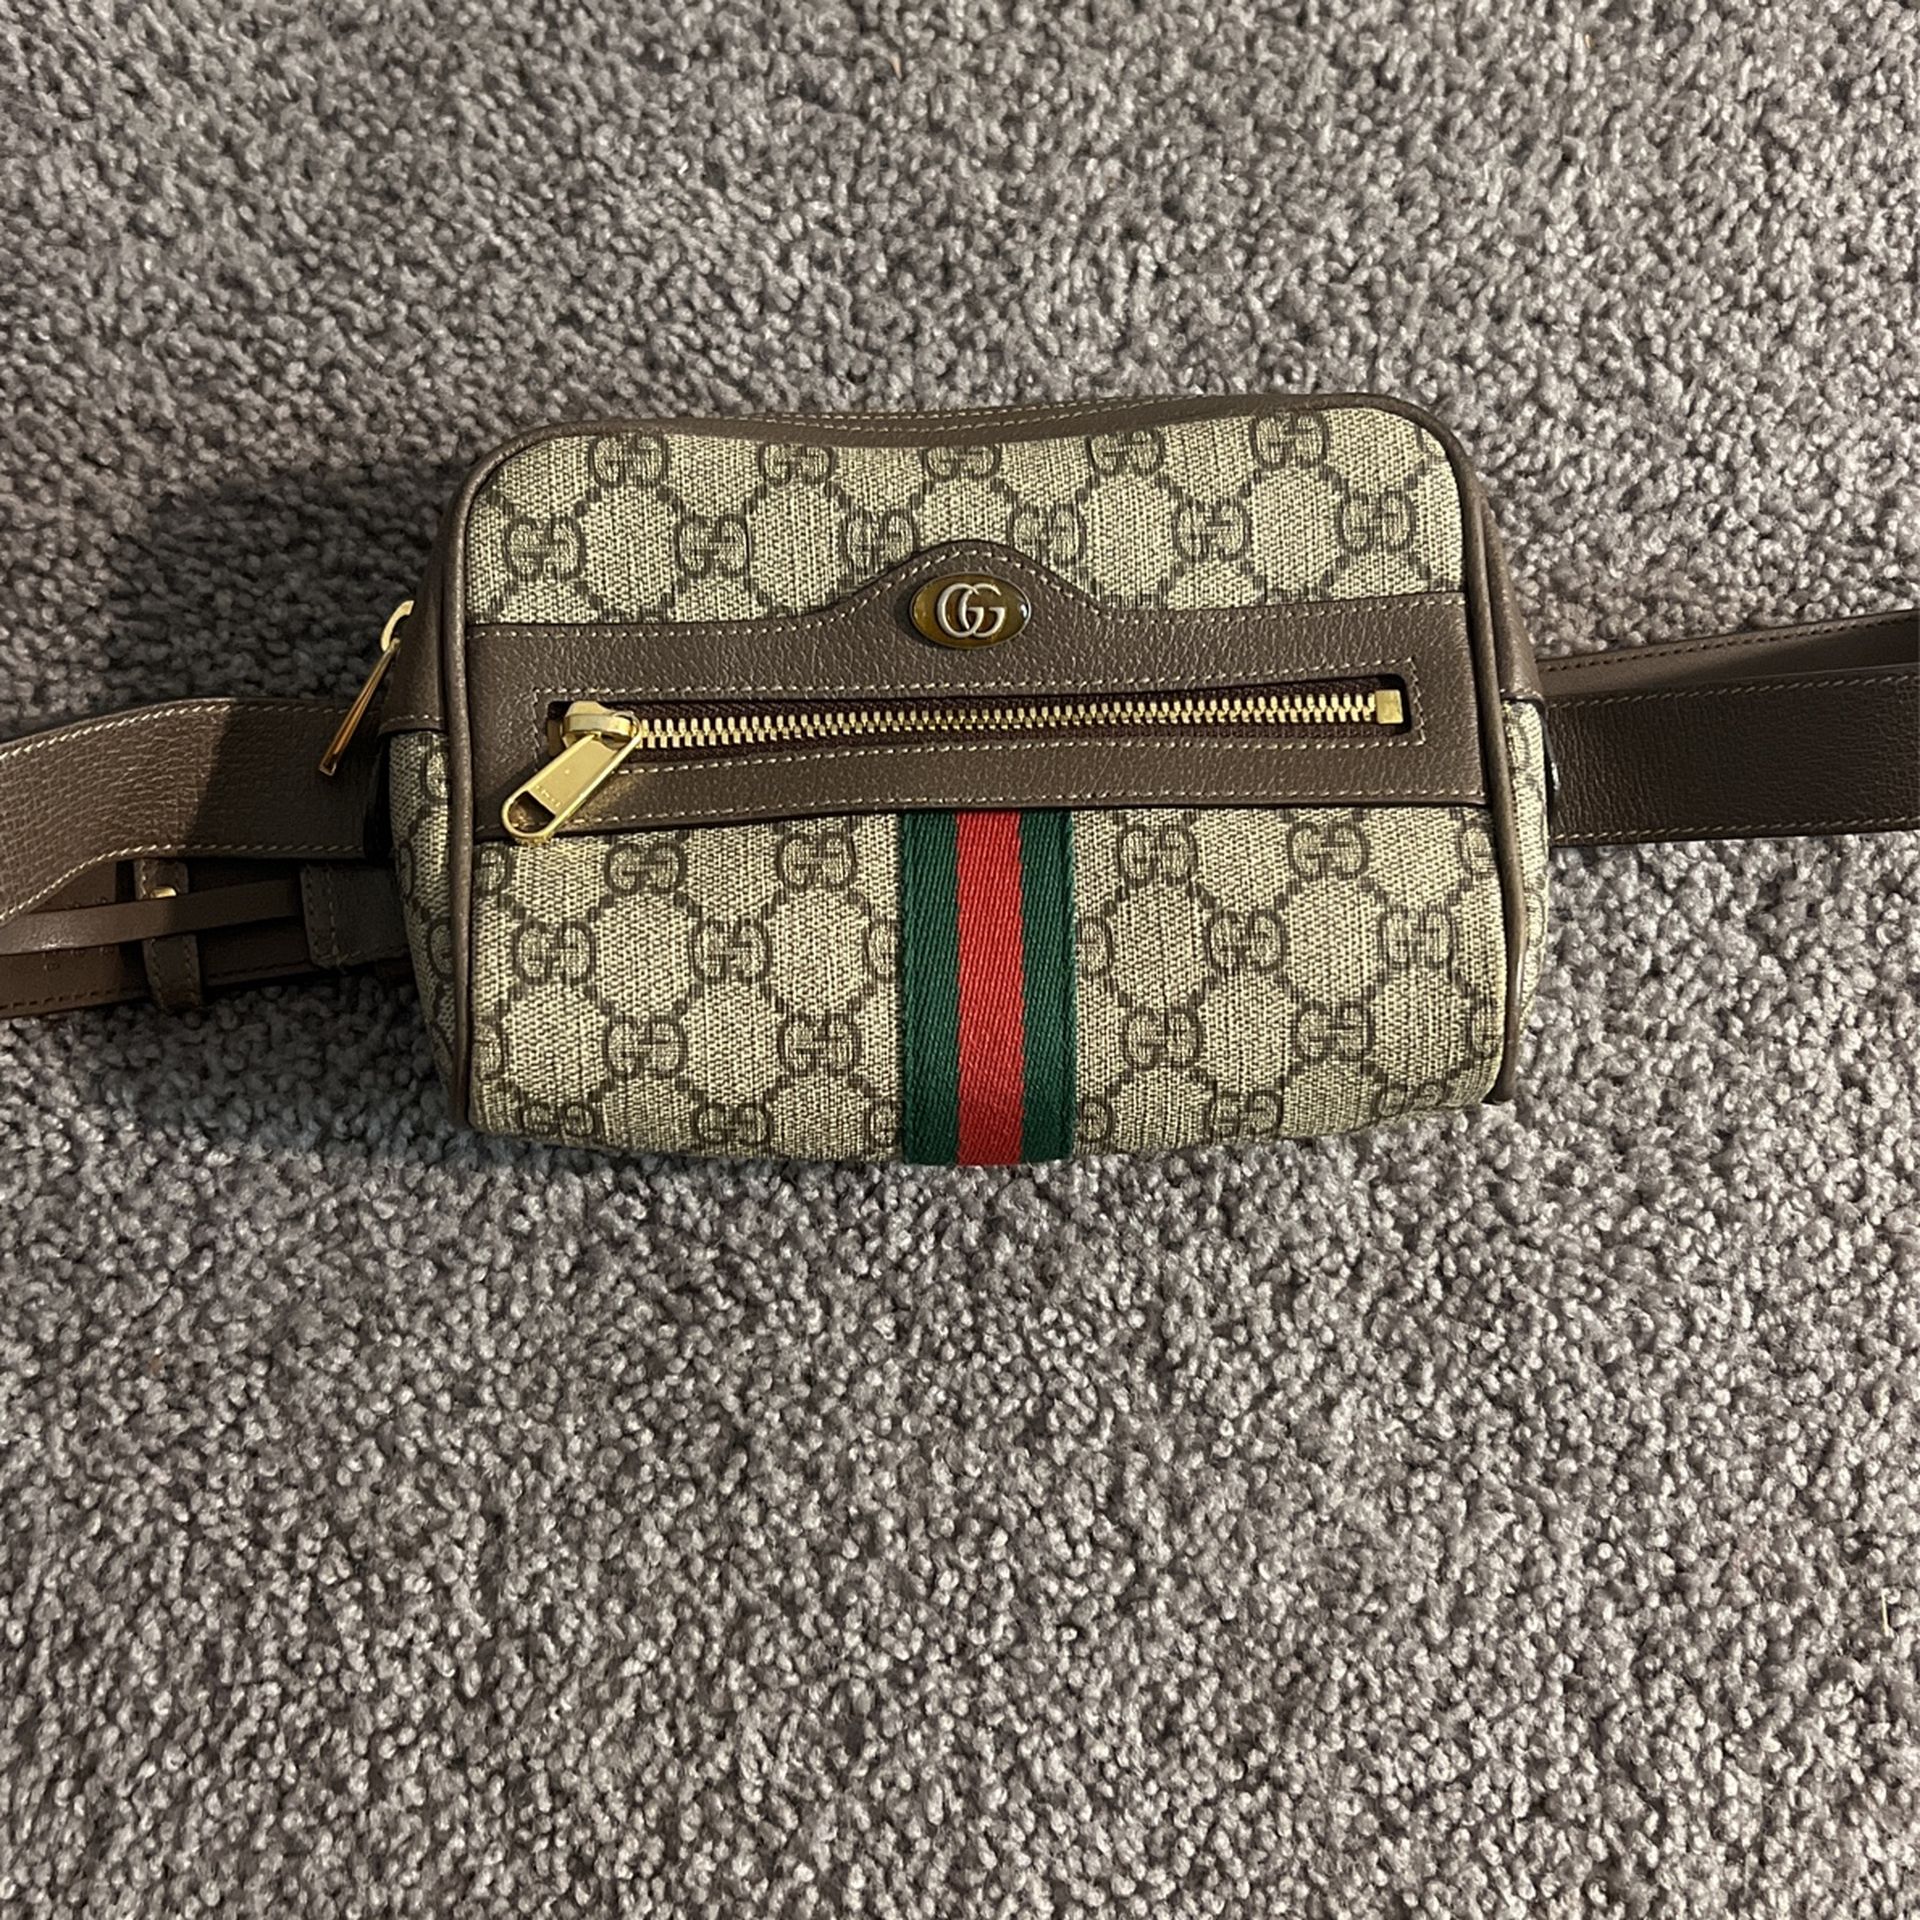 Auth. Gucci Ophidia Supreme Med canvas leather Beltbag 